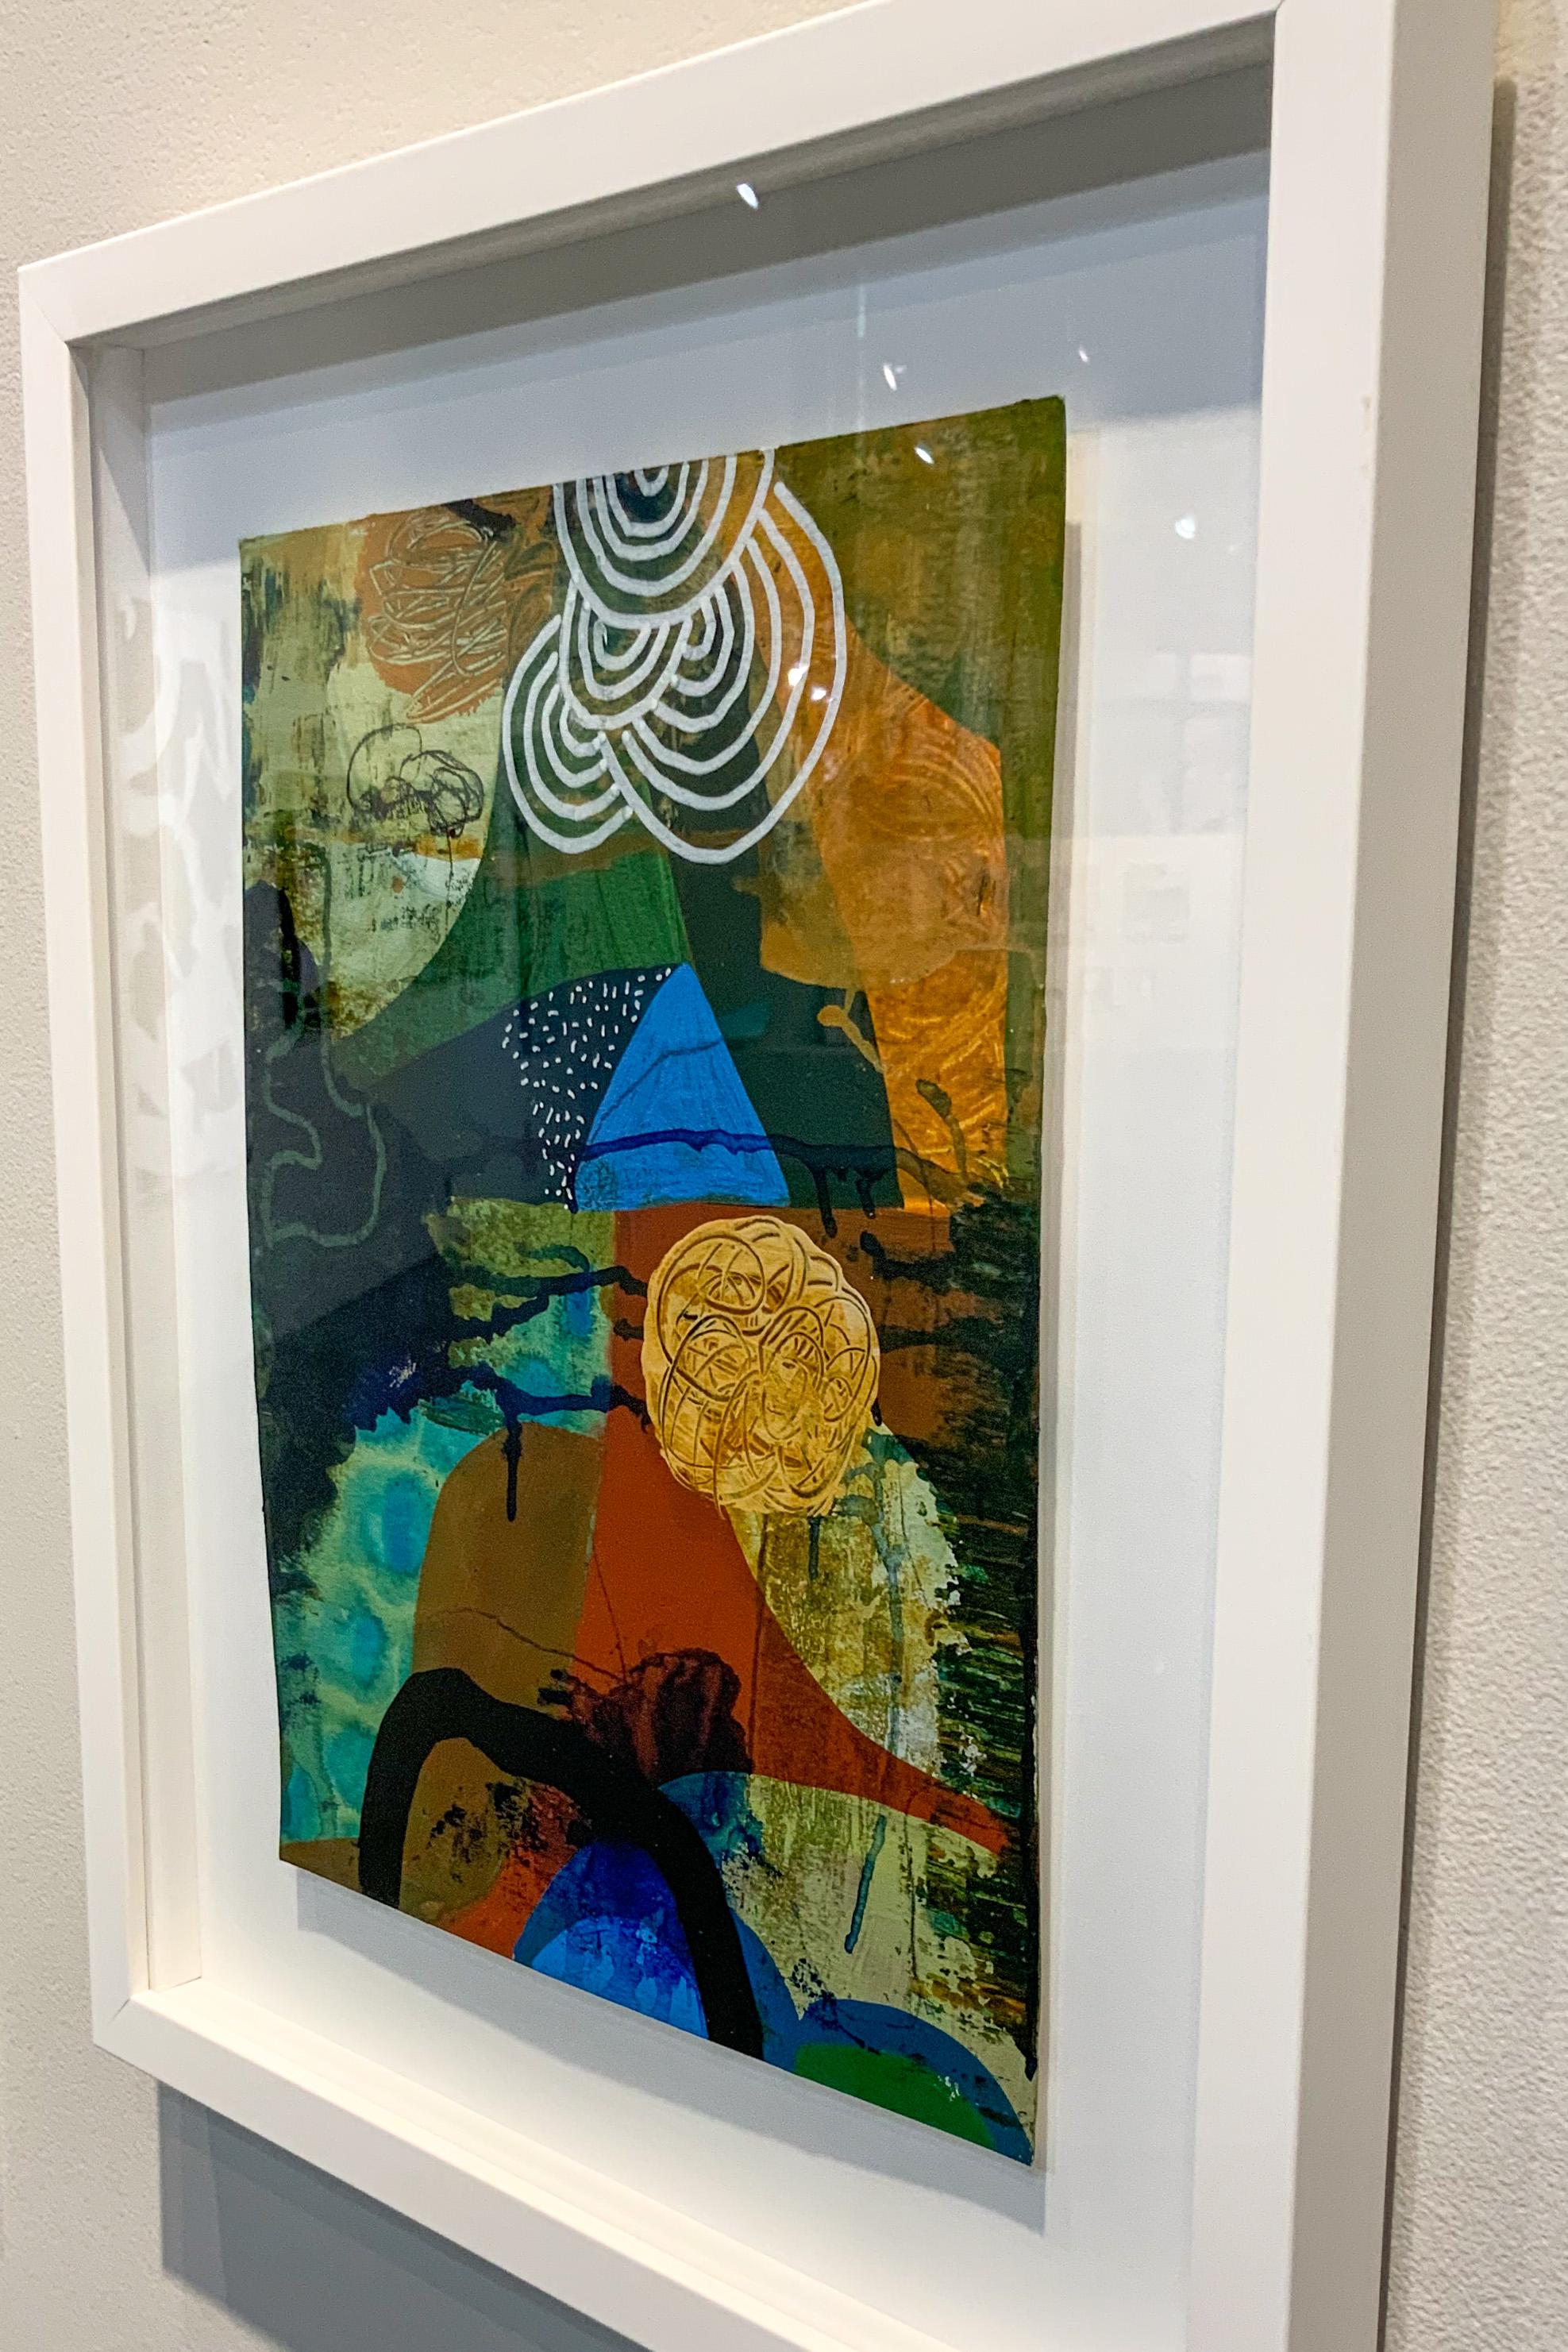 Whether we are conscious or not, dreams are a state of imagination that can transport us into new dimensions and open our eyes to see the world in an entirely new light. In her work Day Dream, Cheryl Warrick depicts the abstract shapes, colors and